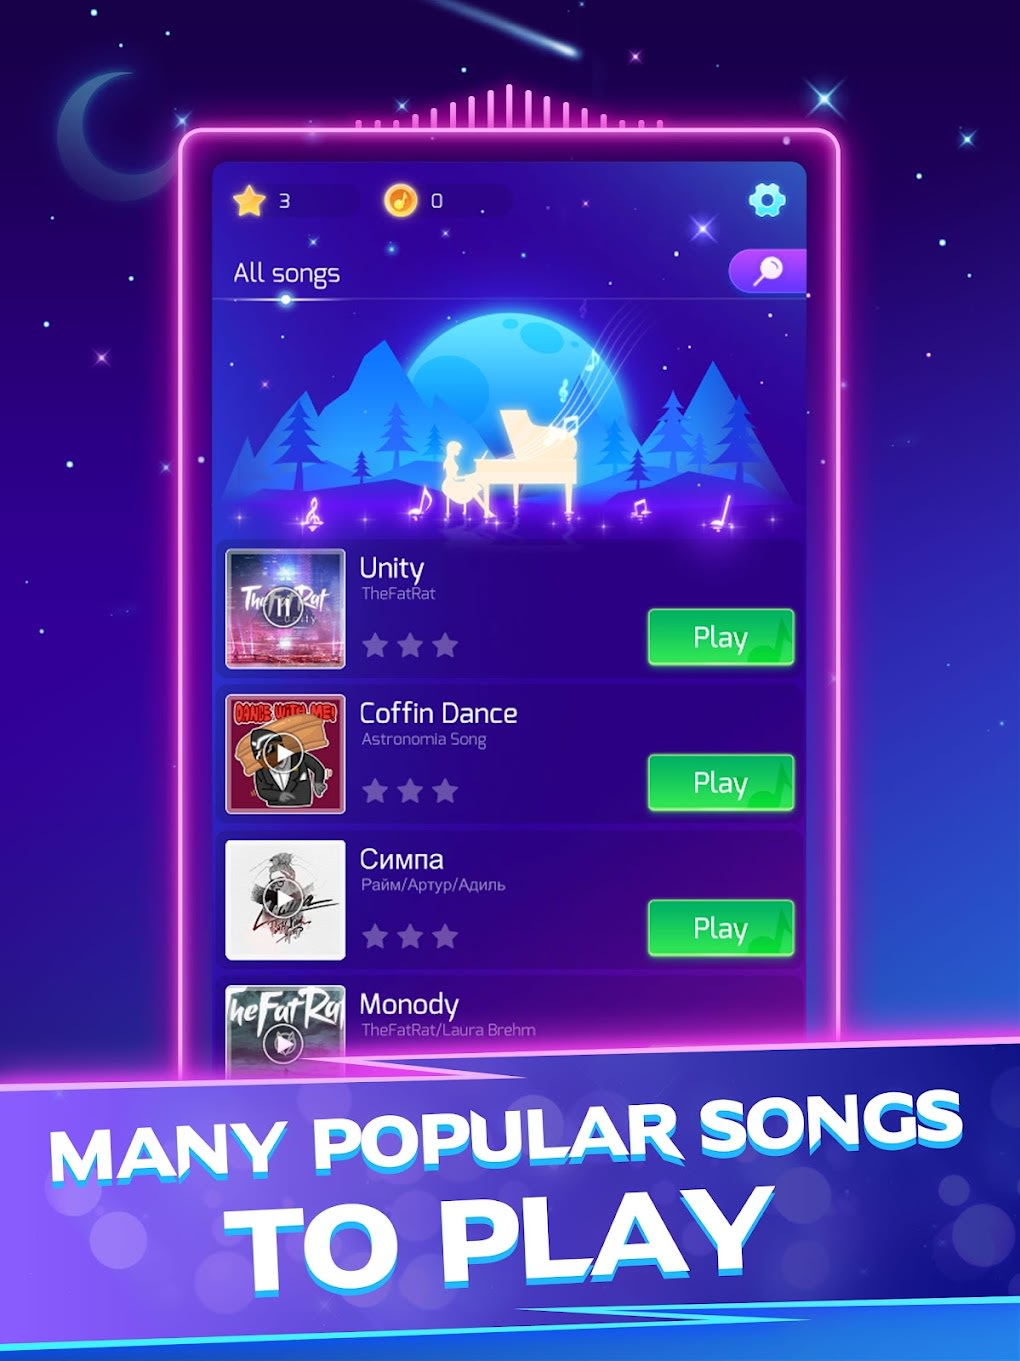 Piano Tiles 3 APK for Android Download